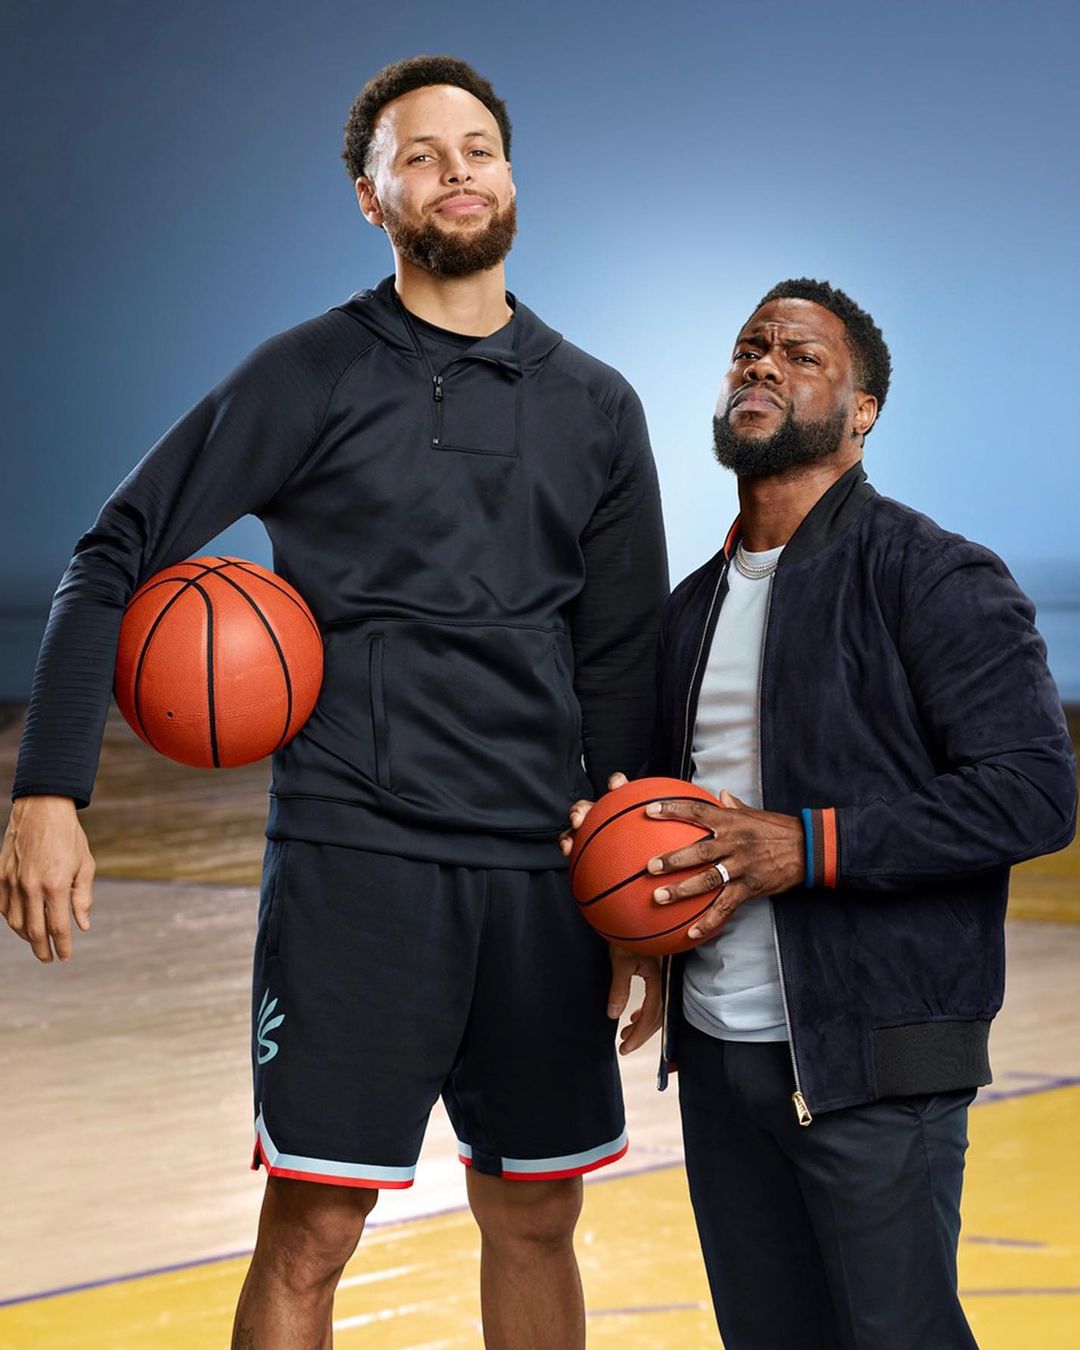 Curry Brazil on X: "Stephen Curry x Kevin Hart https://t.co/hGRONjELeV" / X